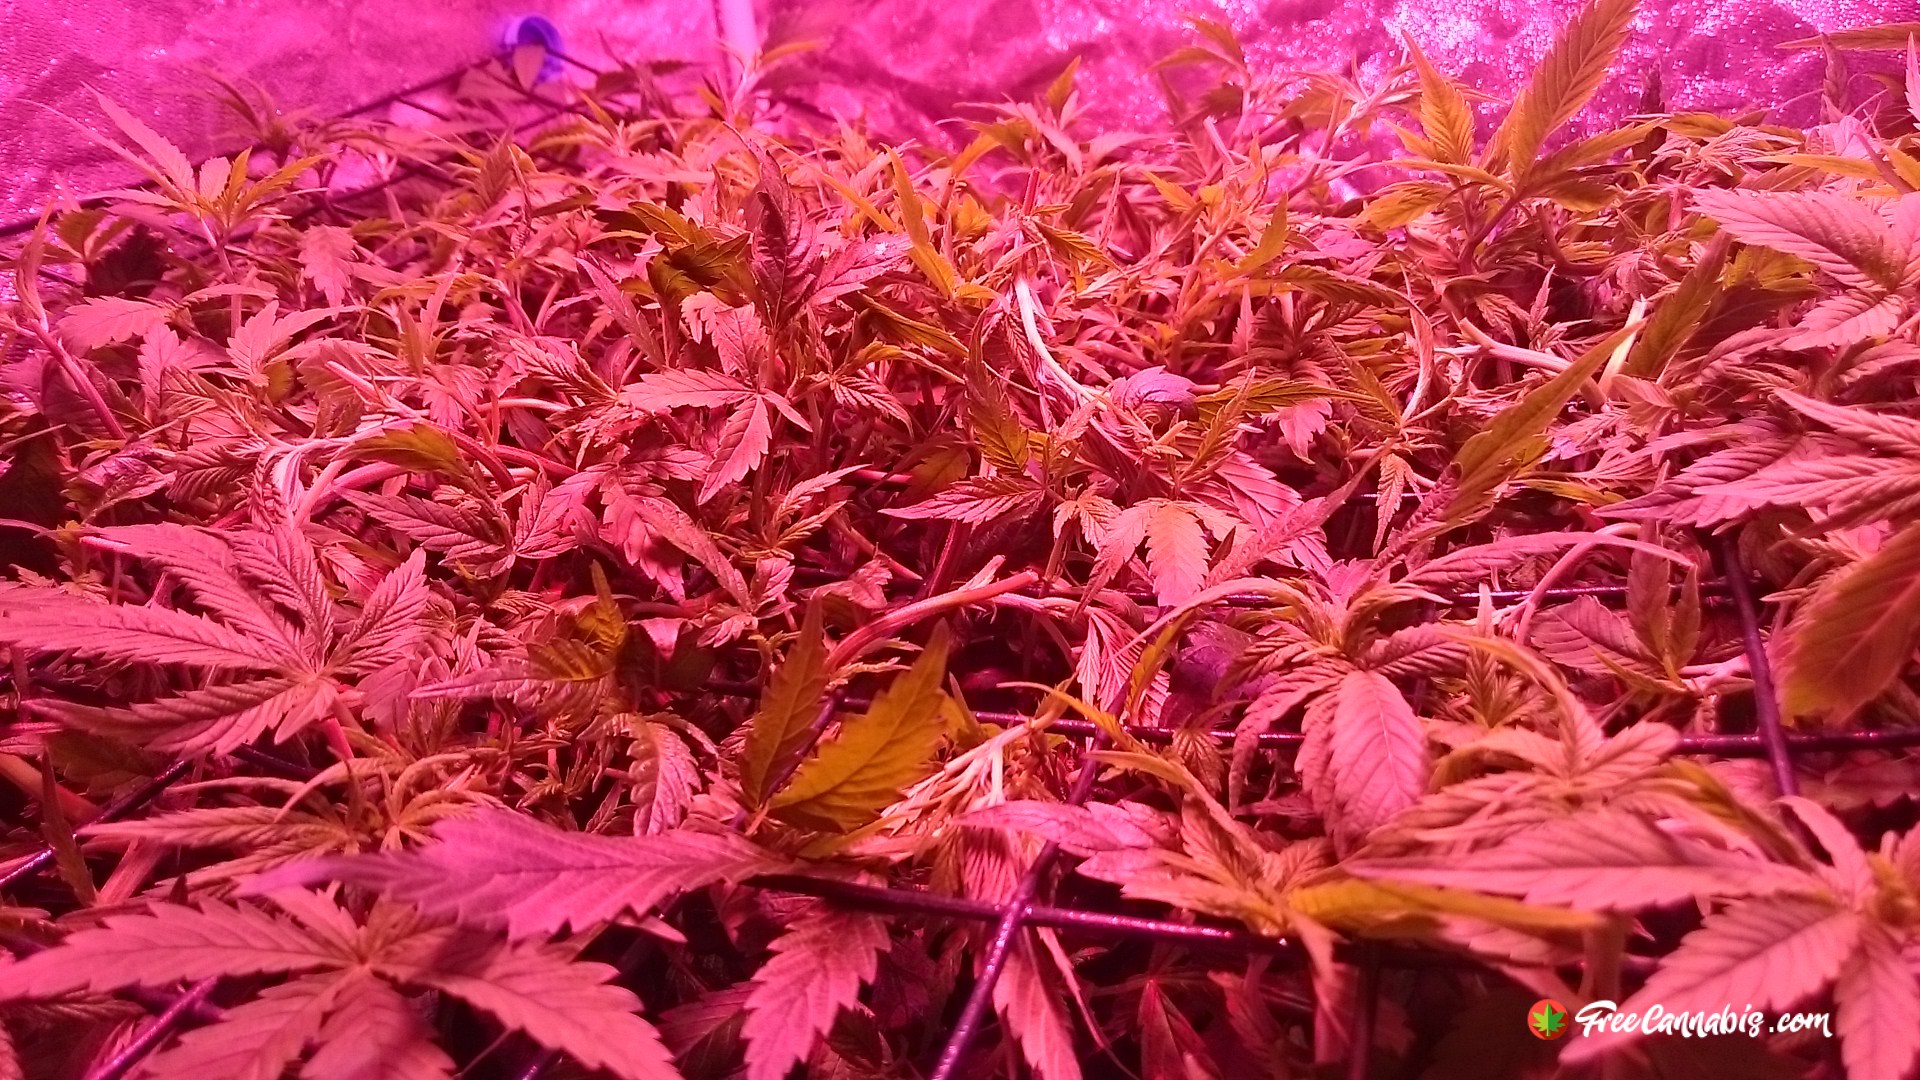 Scrog not far from being ready to flower